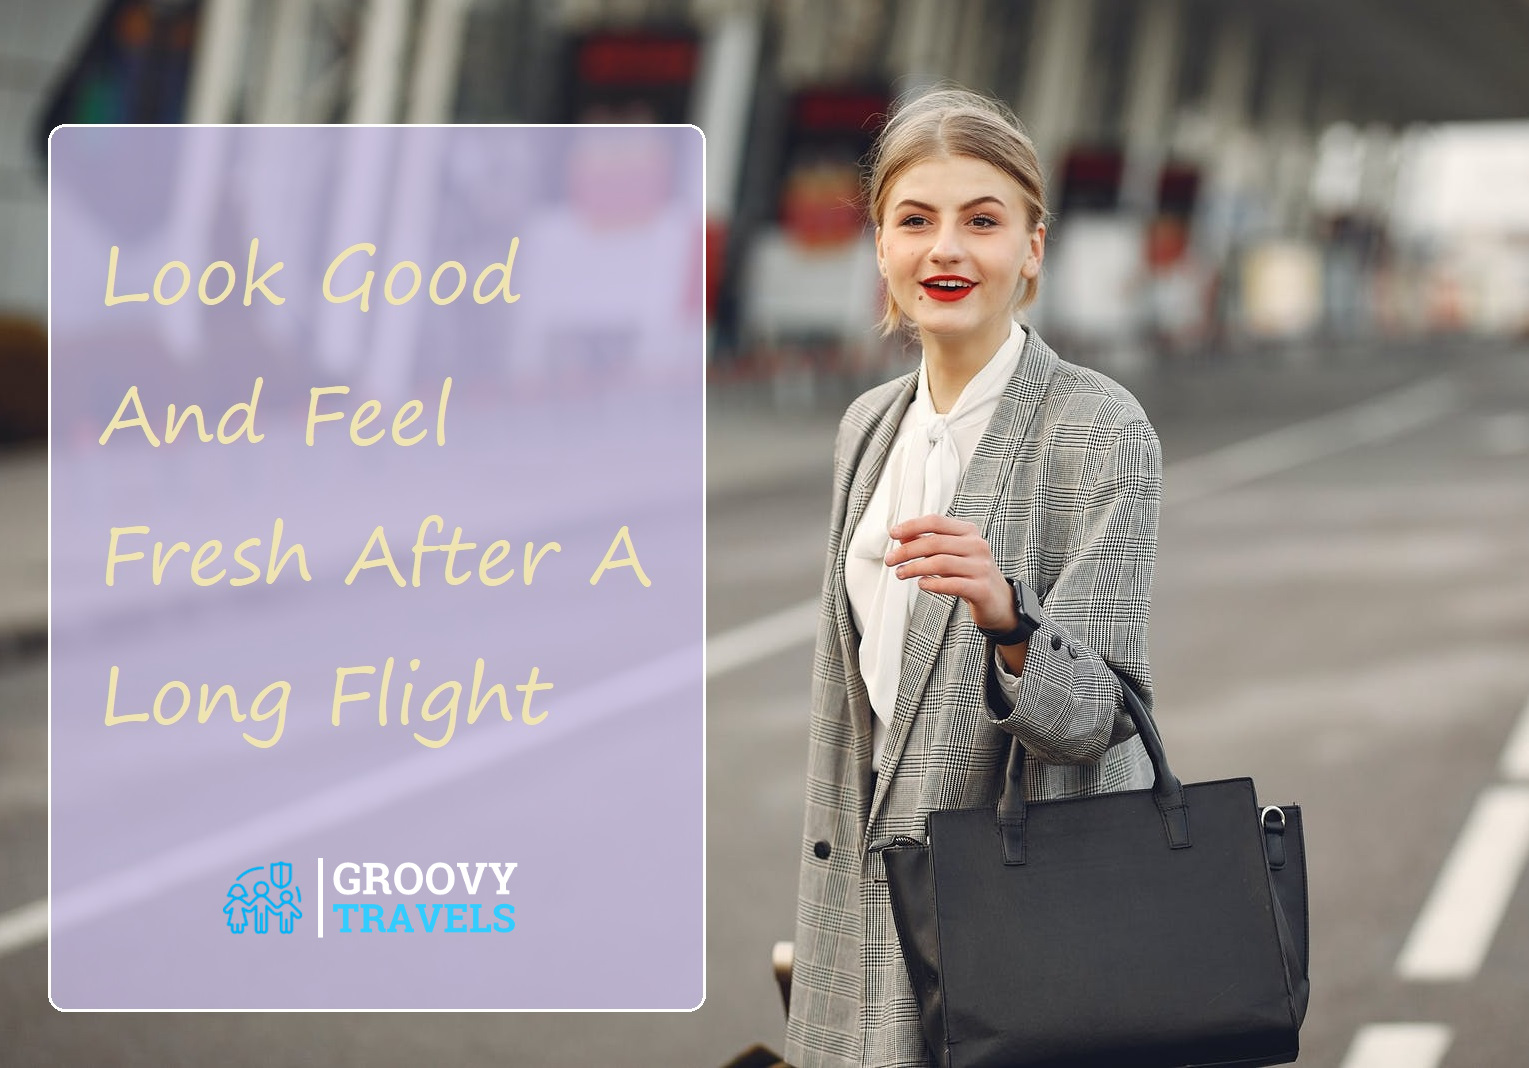 Look Good And Feel Fresh After A Long Flight